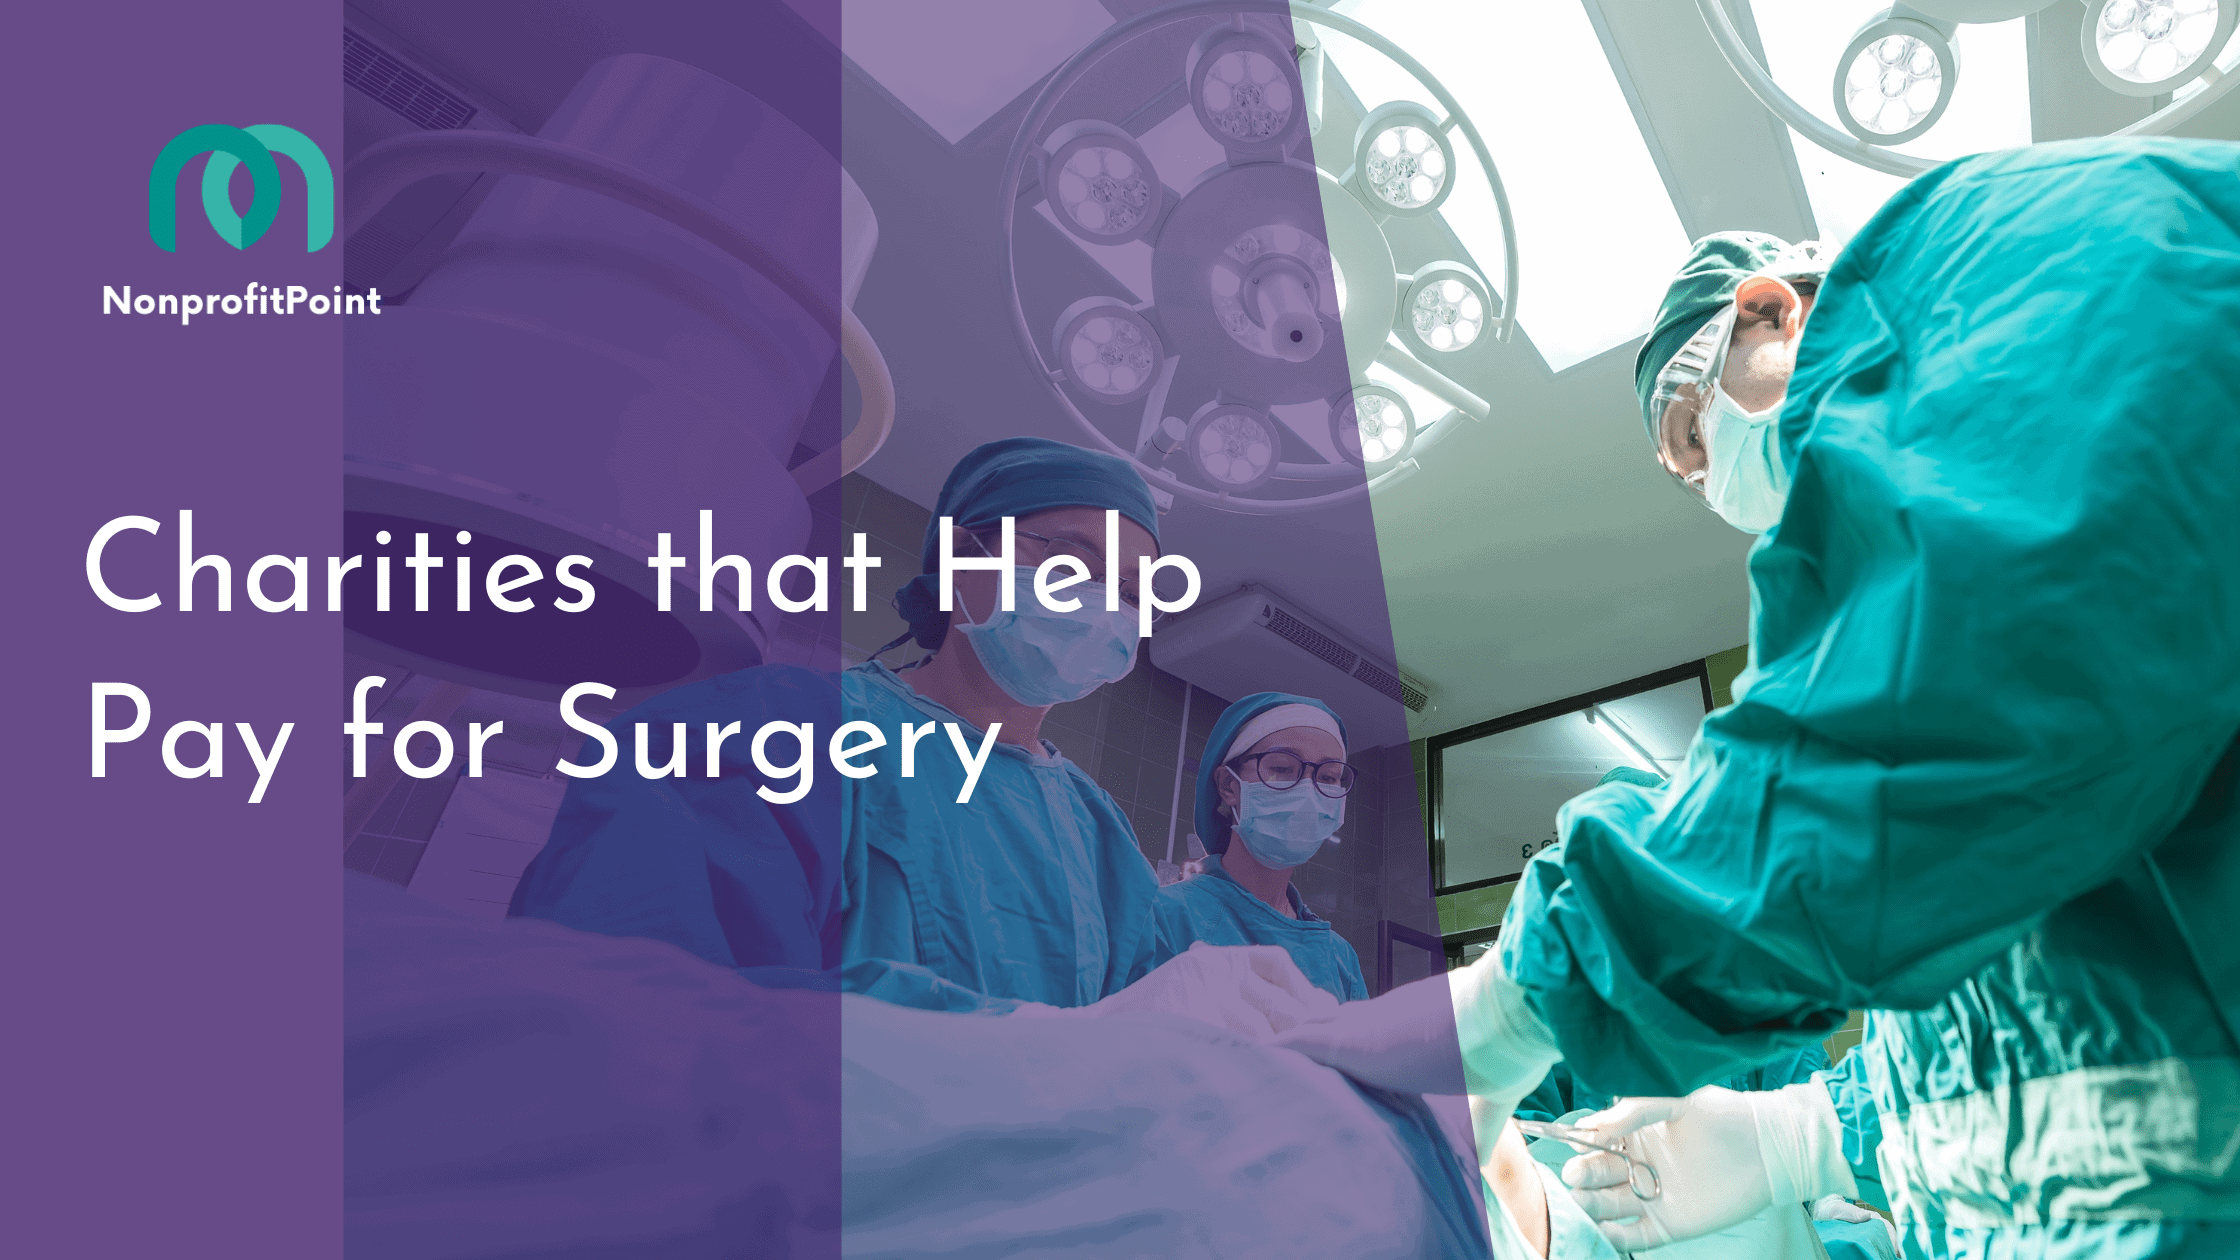 Charities that Help Pay for Surgeries